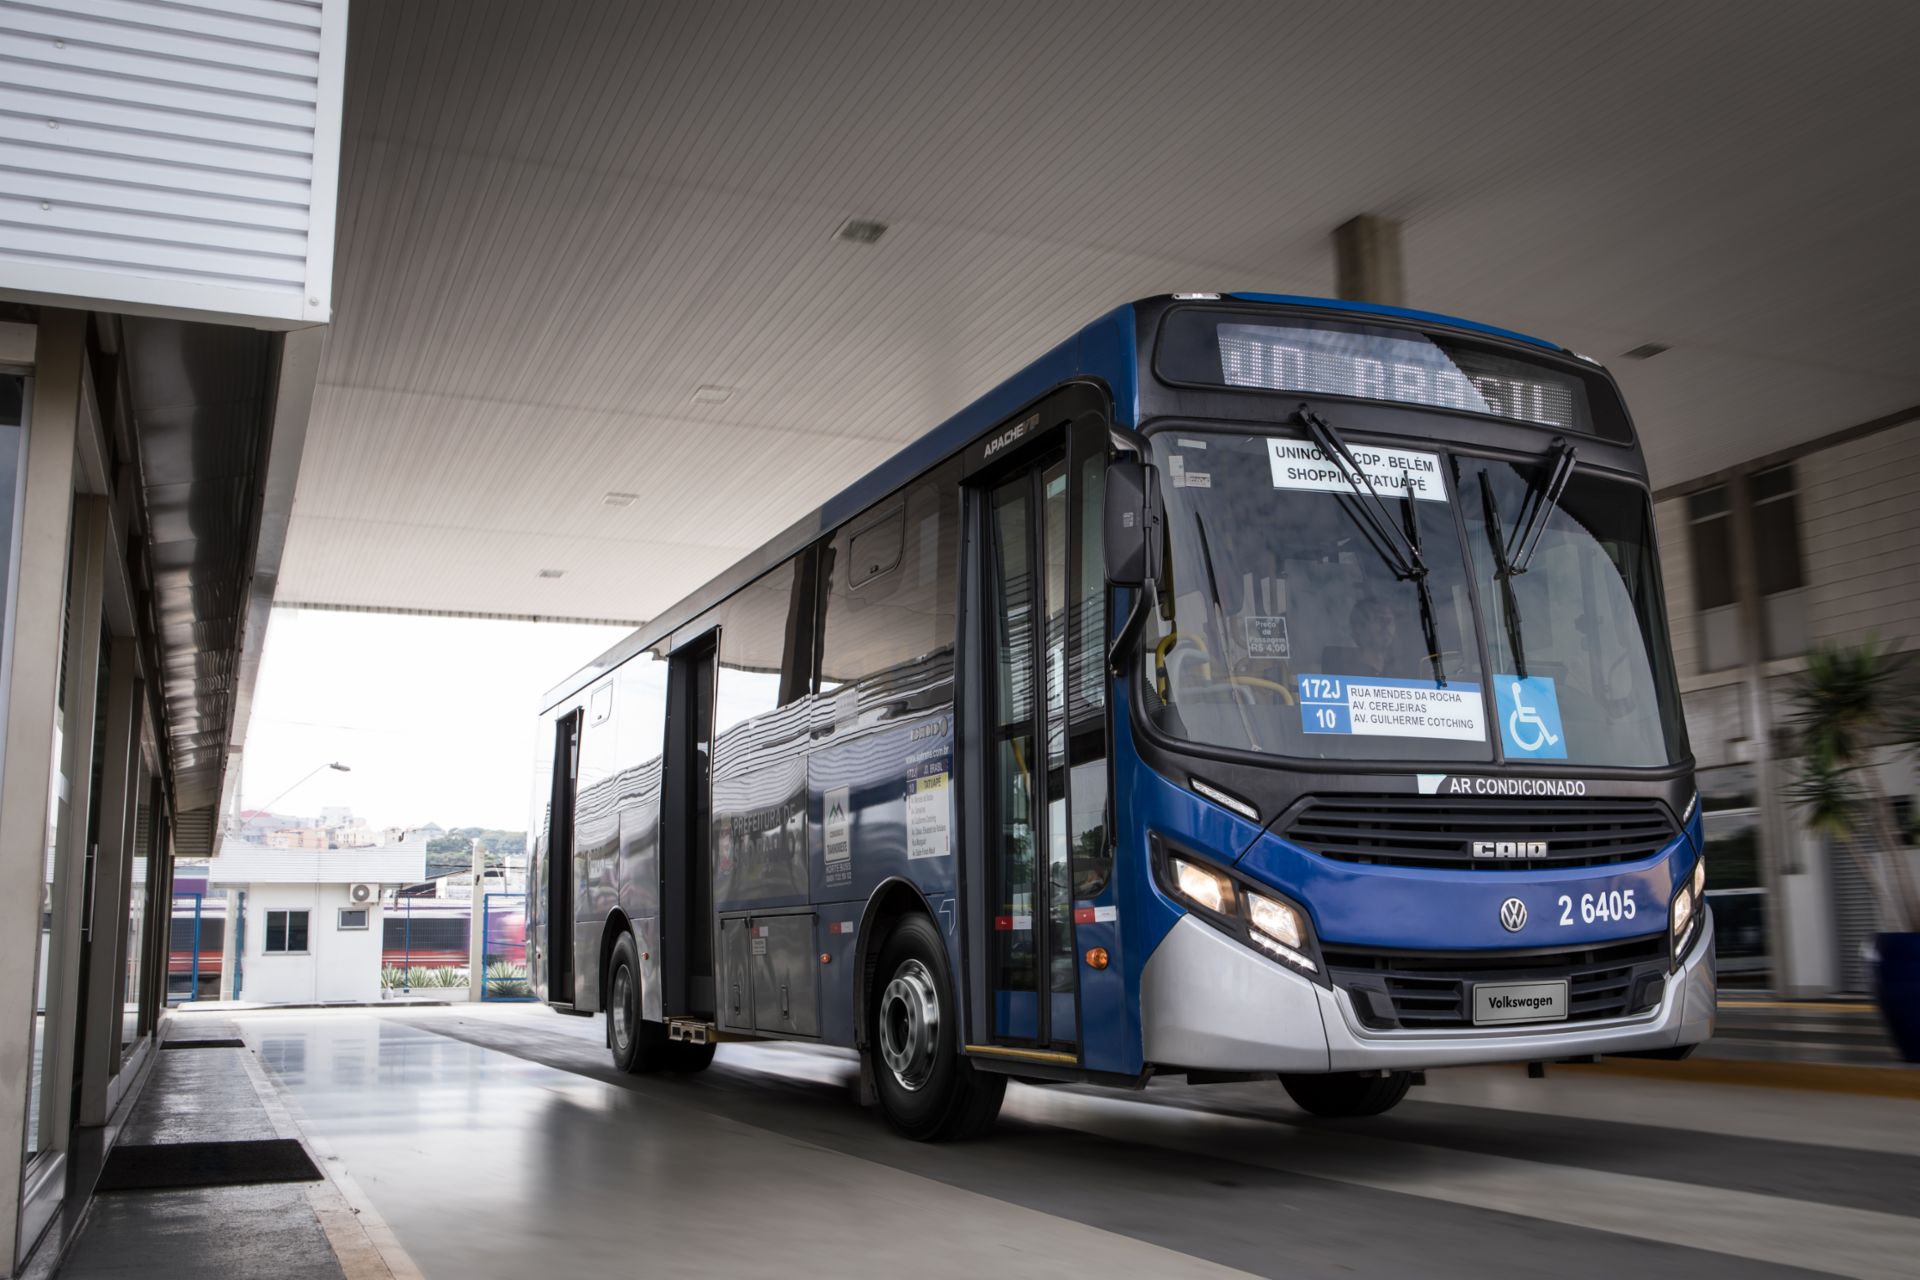 Volkswagen Caminhões e Ônibus has 25 years of expertise and know-how in tailormade buses.
                 